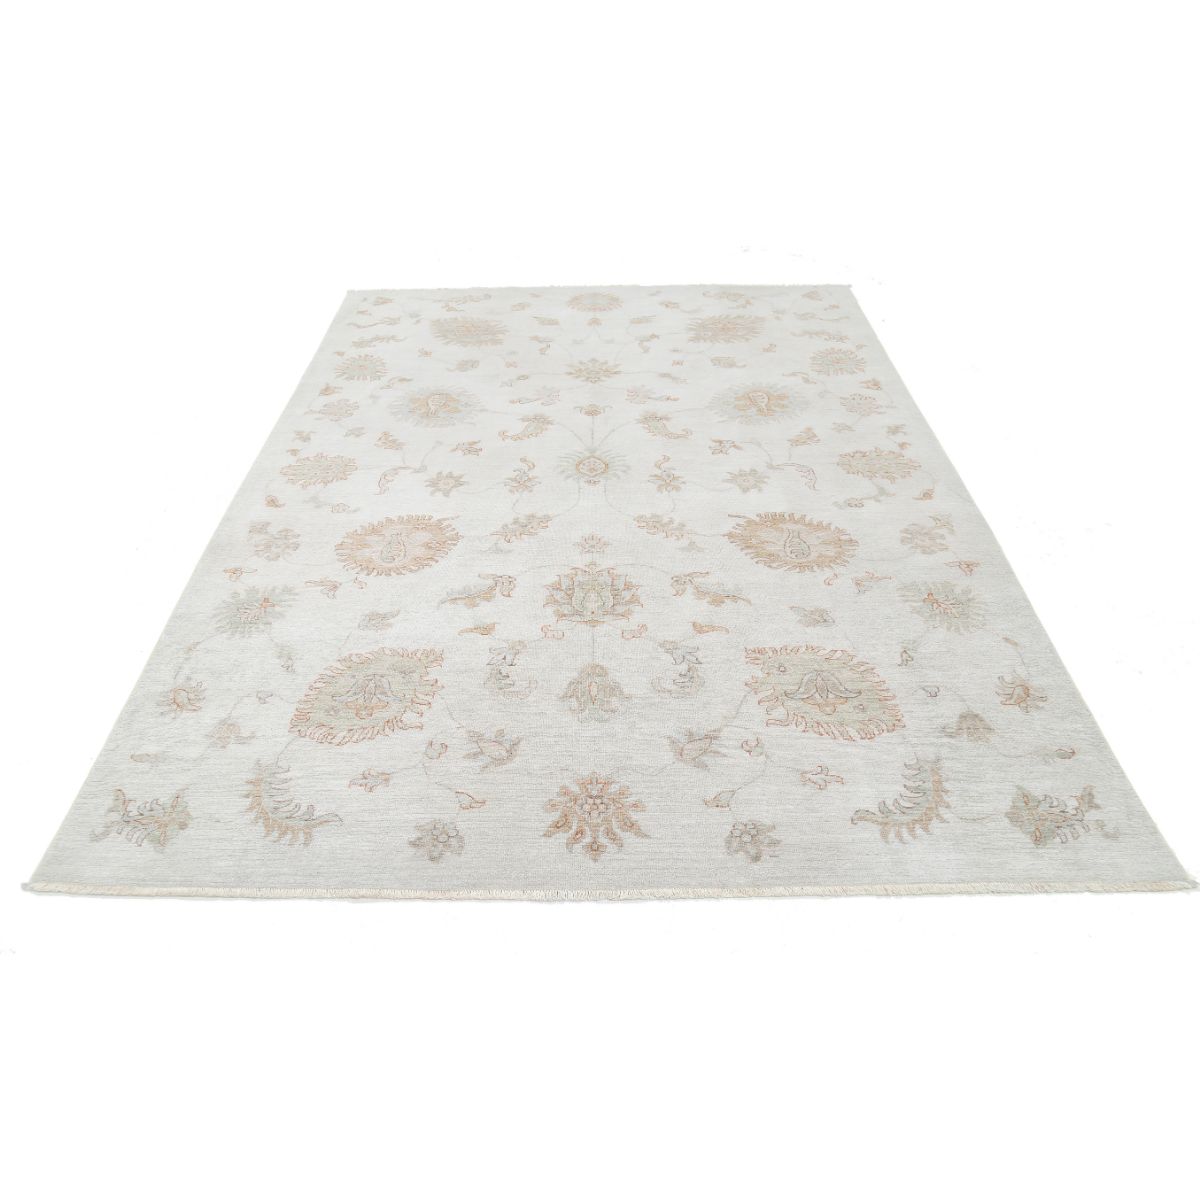 Artemix 6'8" X 9'6" Wool Hand-Knotted Rug